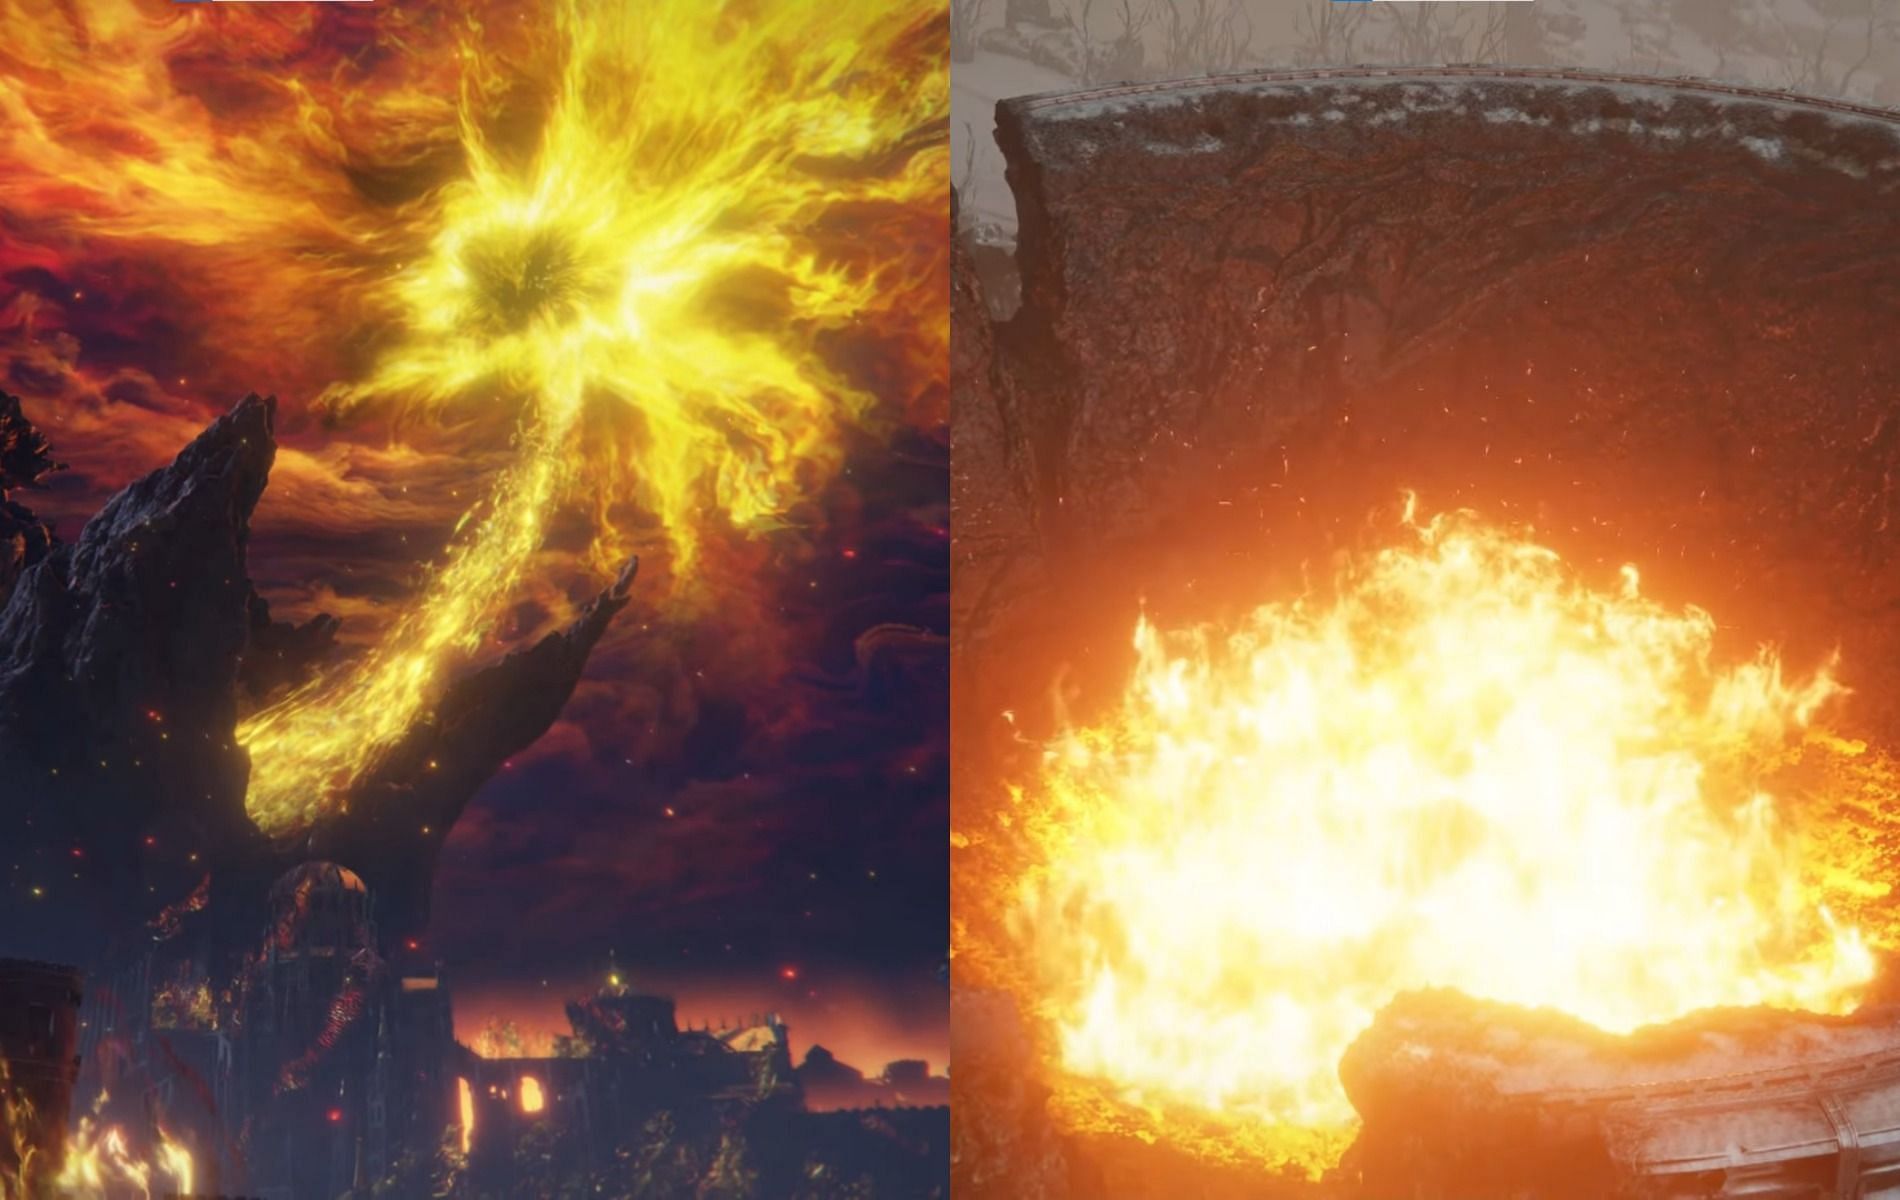 Getting the &lsquo;Lord of the Frenzied Flame&rsquo; ending in Elden Ring (Images via Elden Ring)